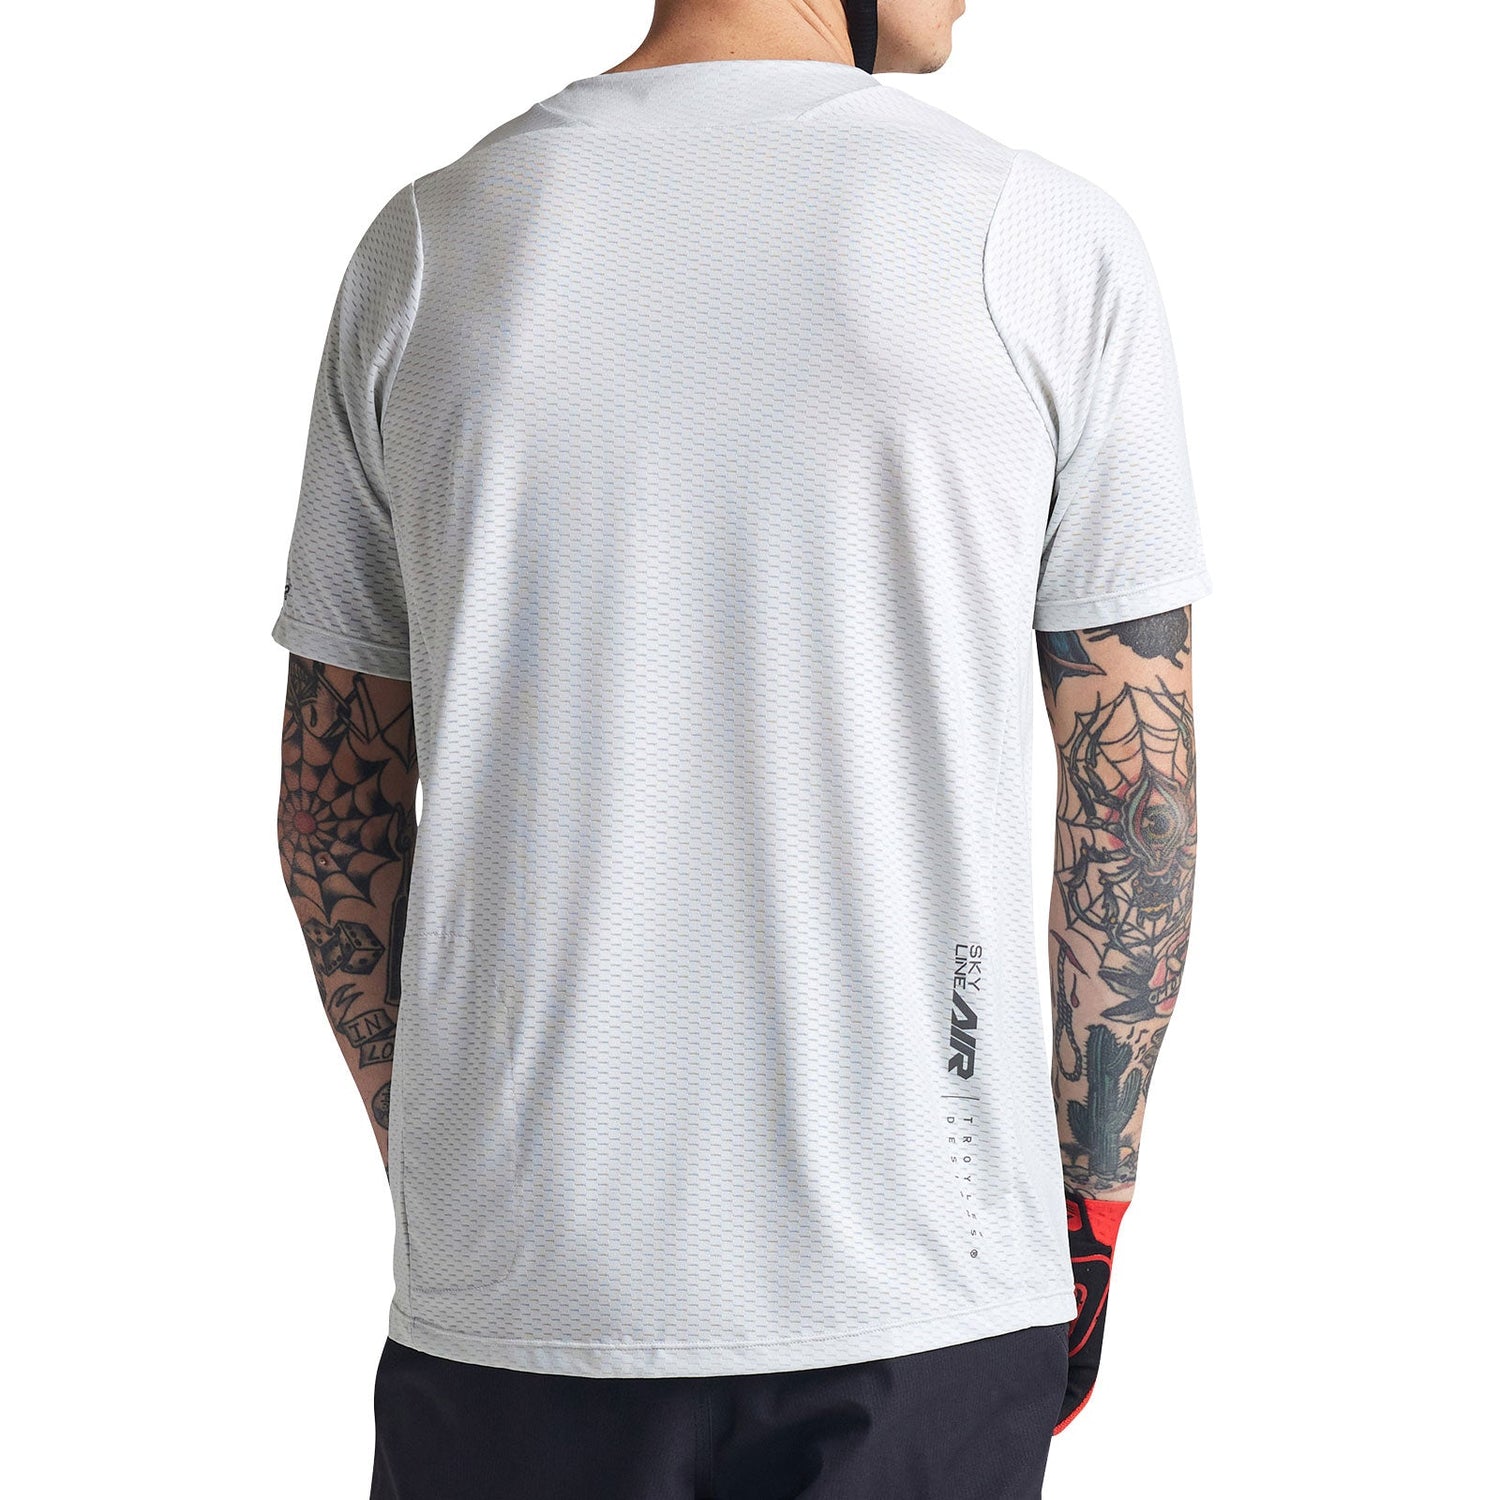 Troy Lee Skyline Air SS Jersey Aircore Cement